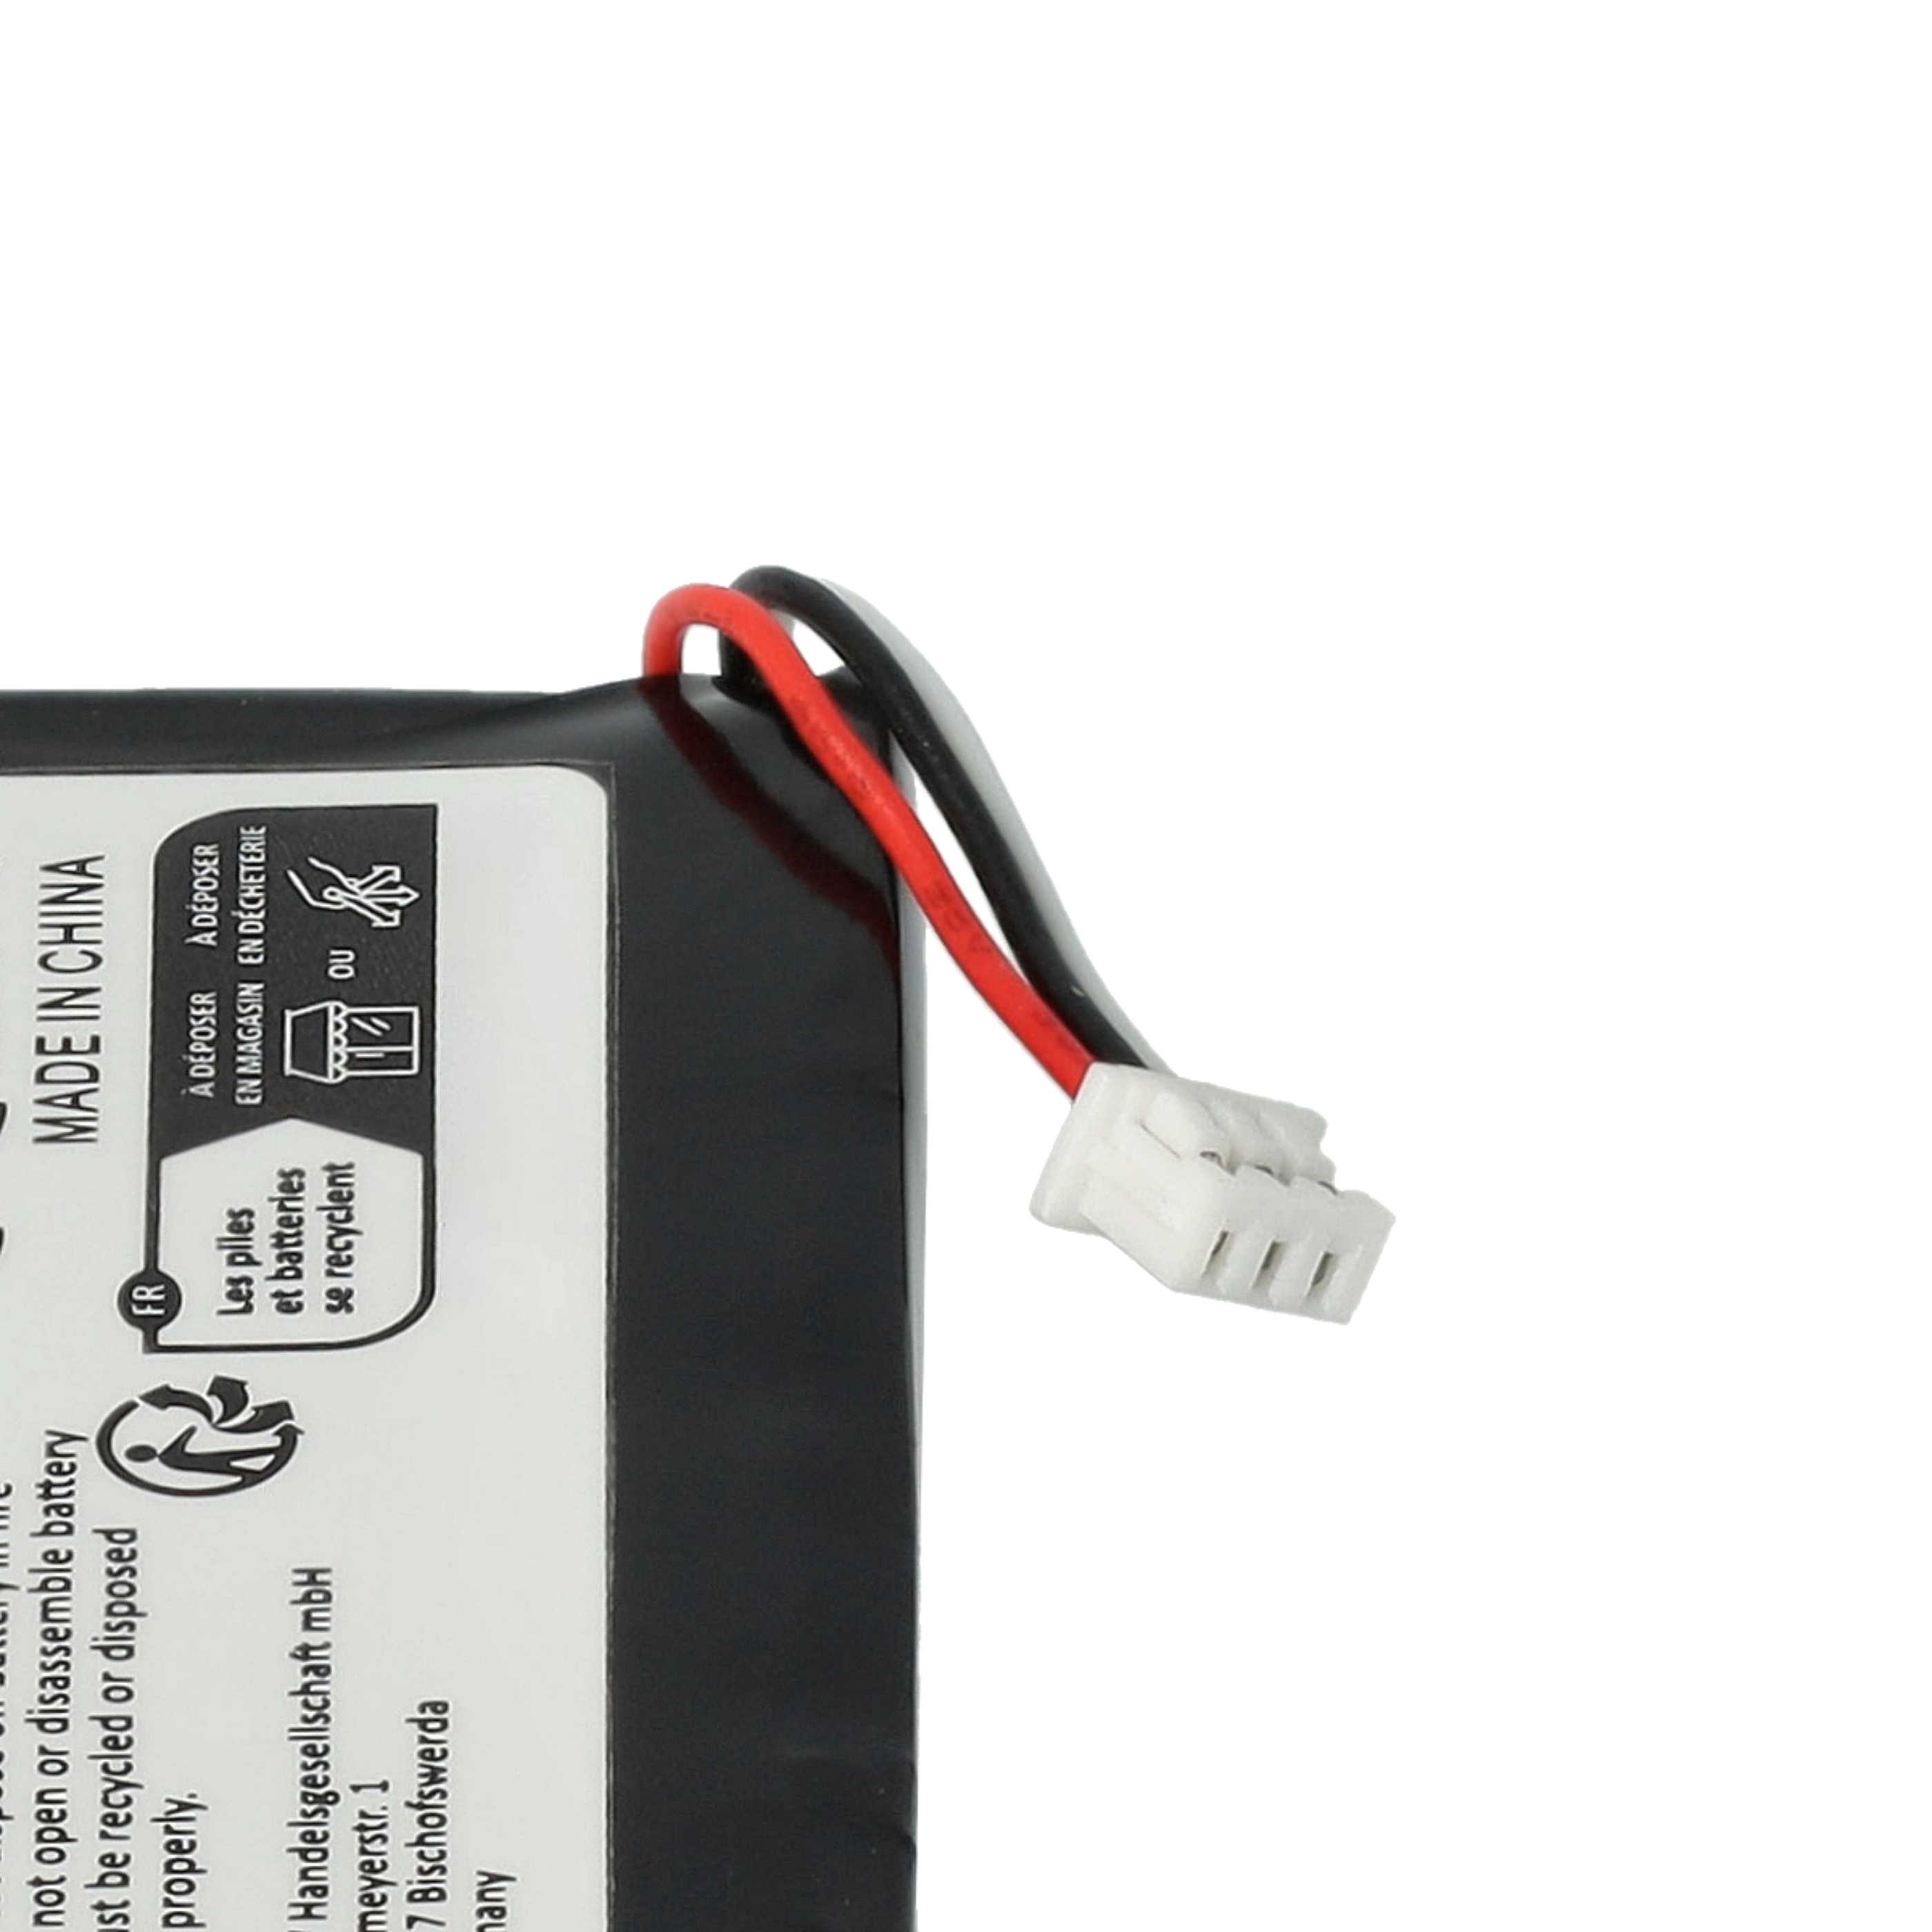 MP3-Player Battery Replacement for Apple 616-0206, 616-0215, 616-0198, 616-0183 - 750mAh 3.7V Li-Ion